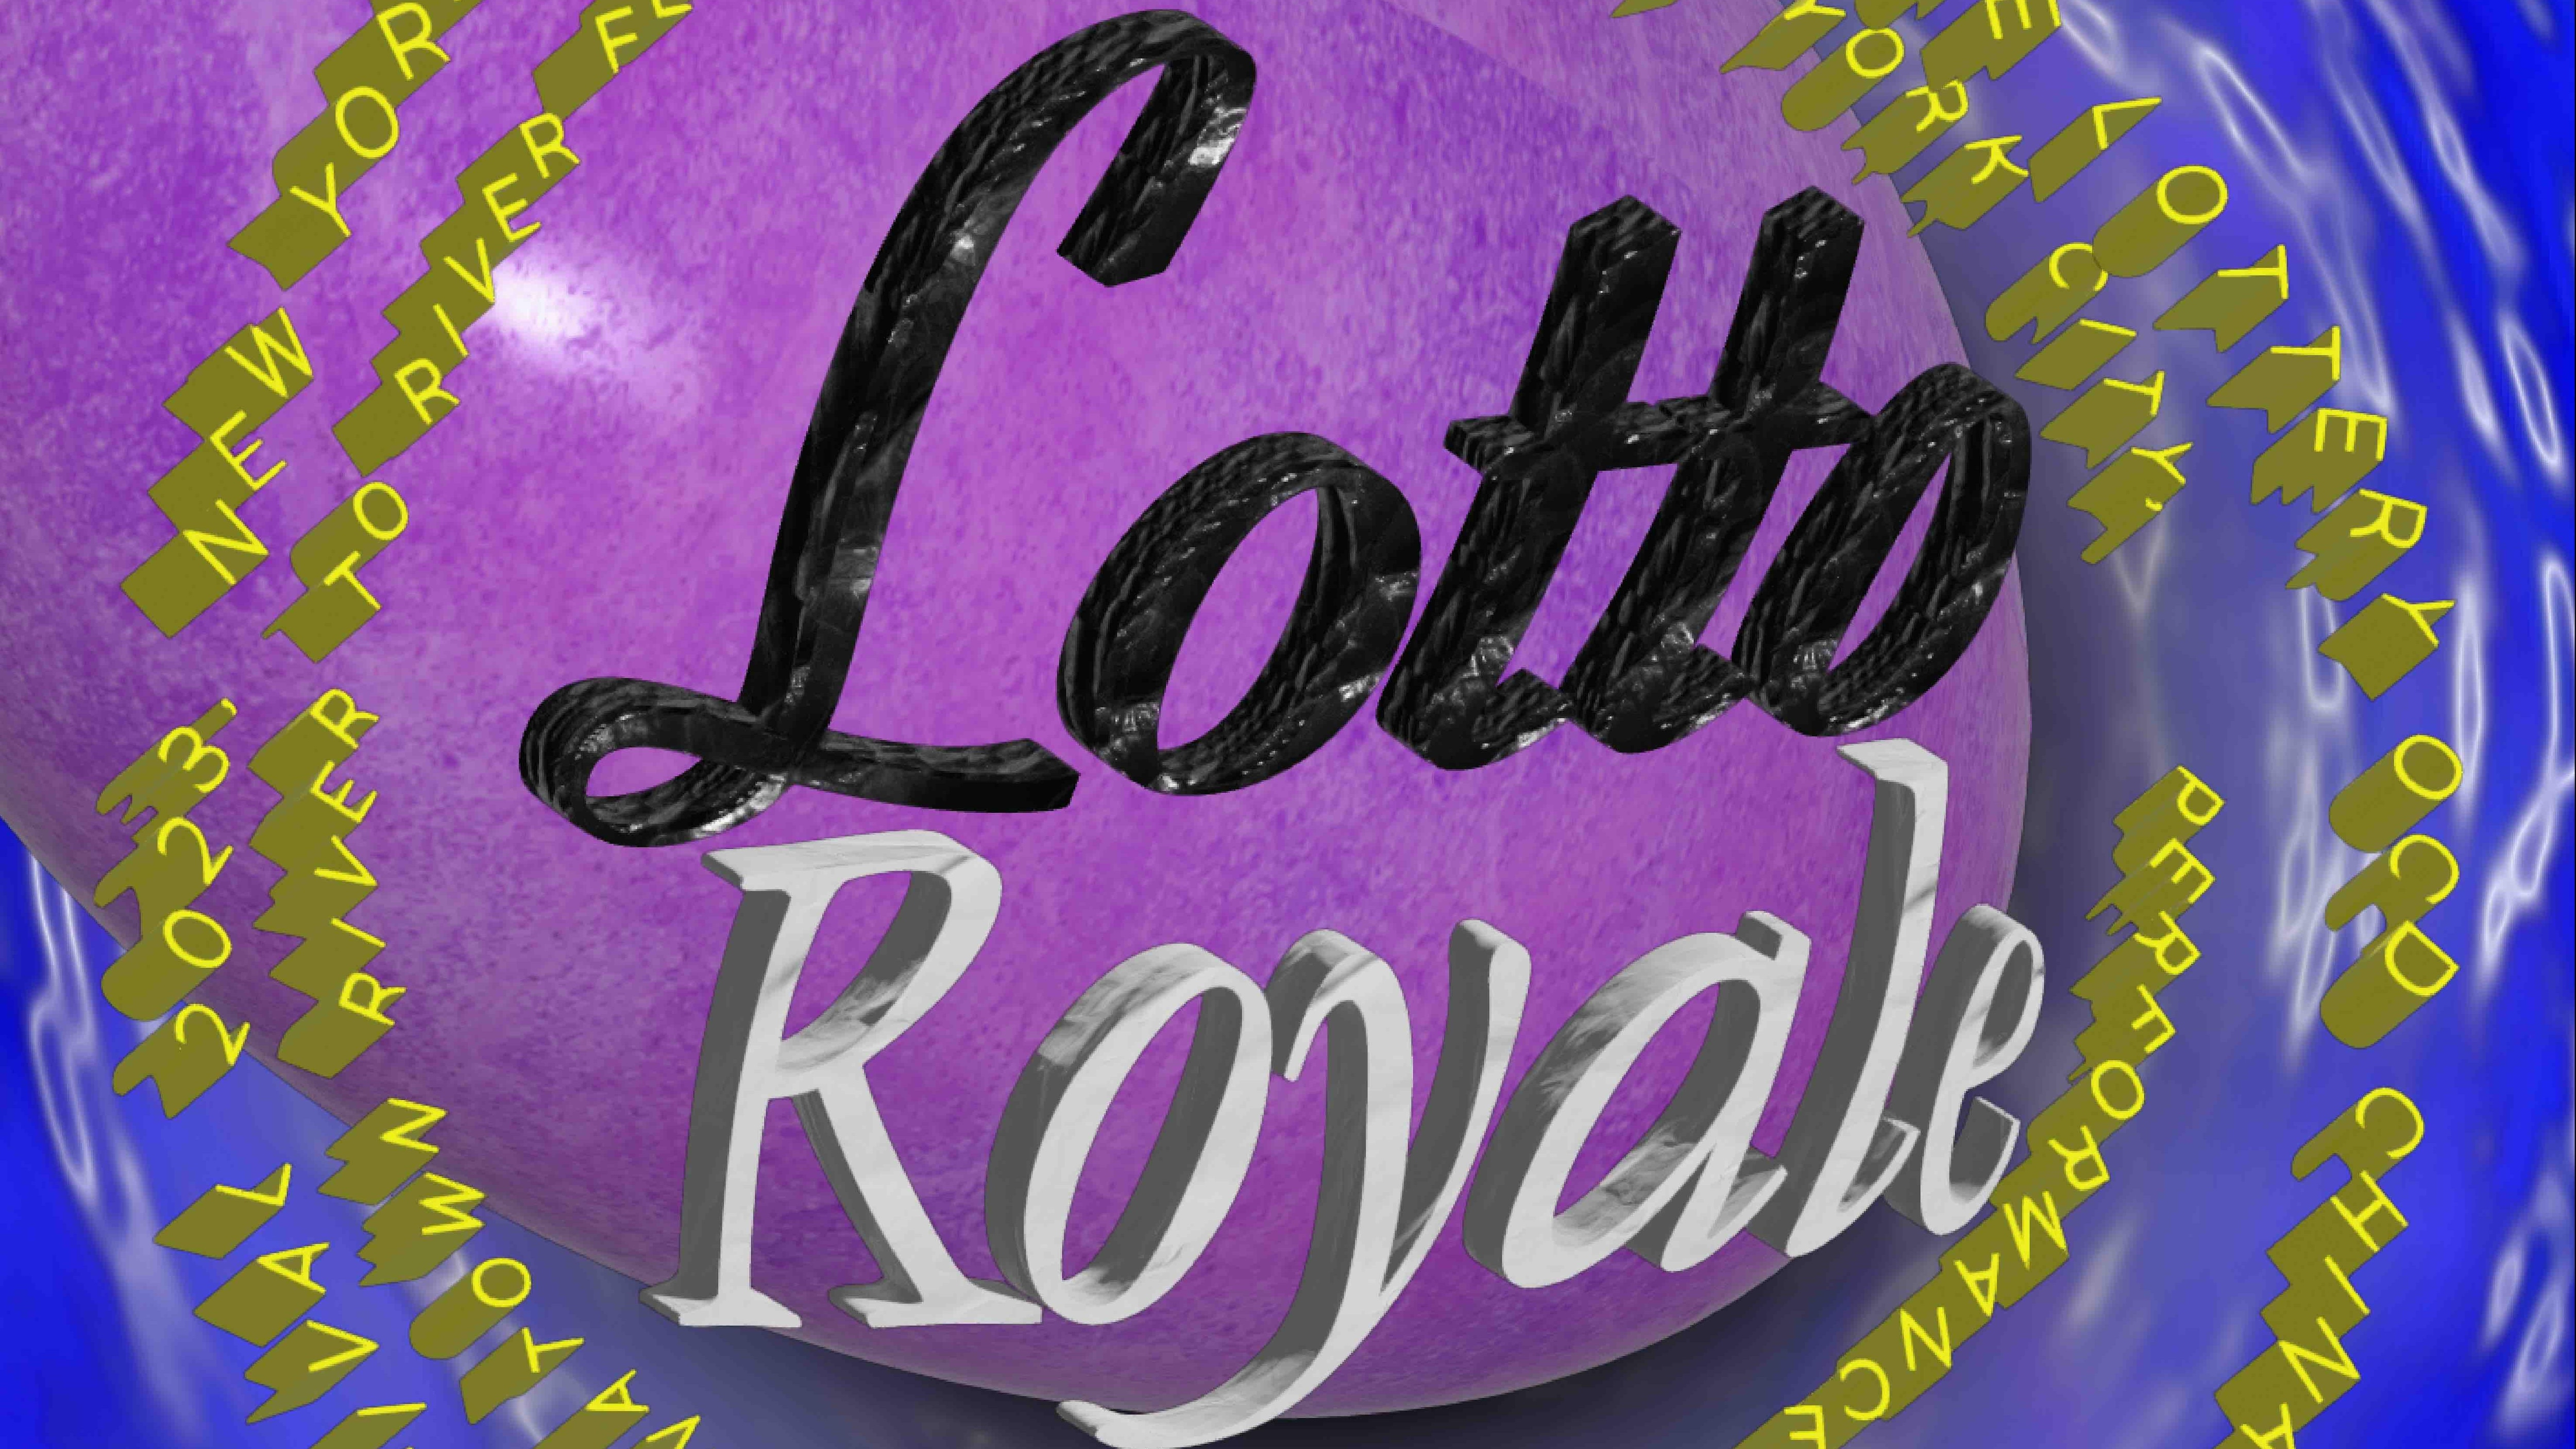 Poster of Lotto Royale